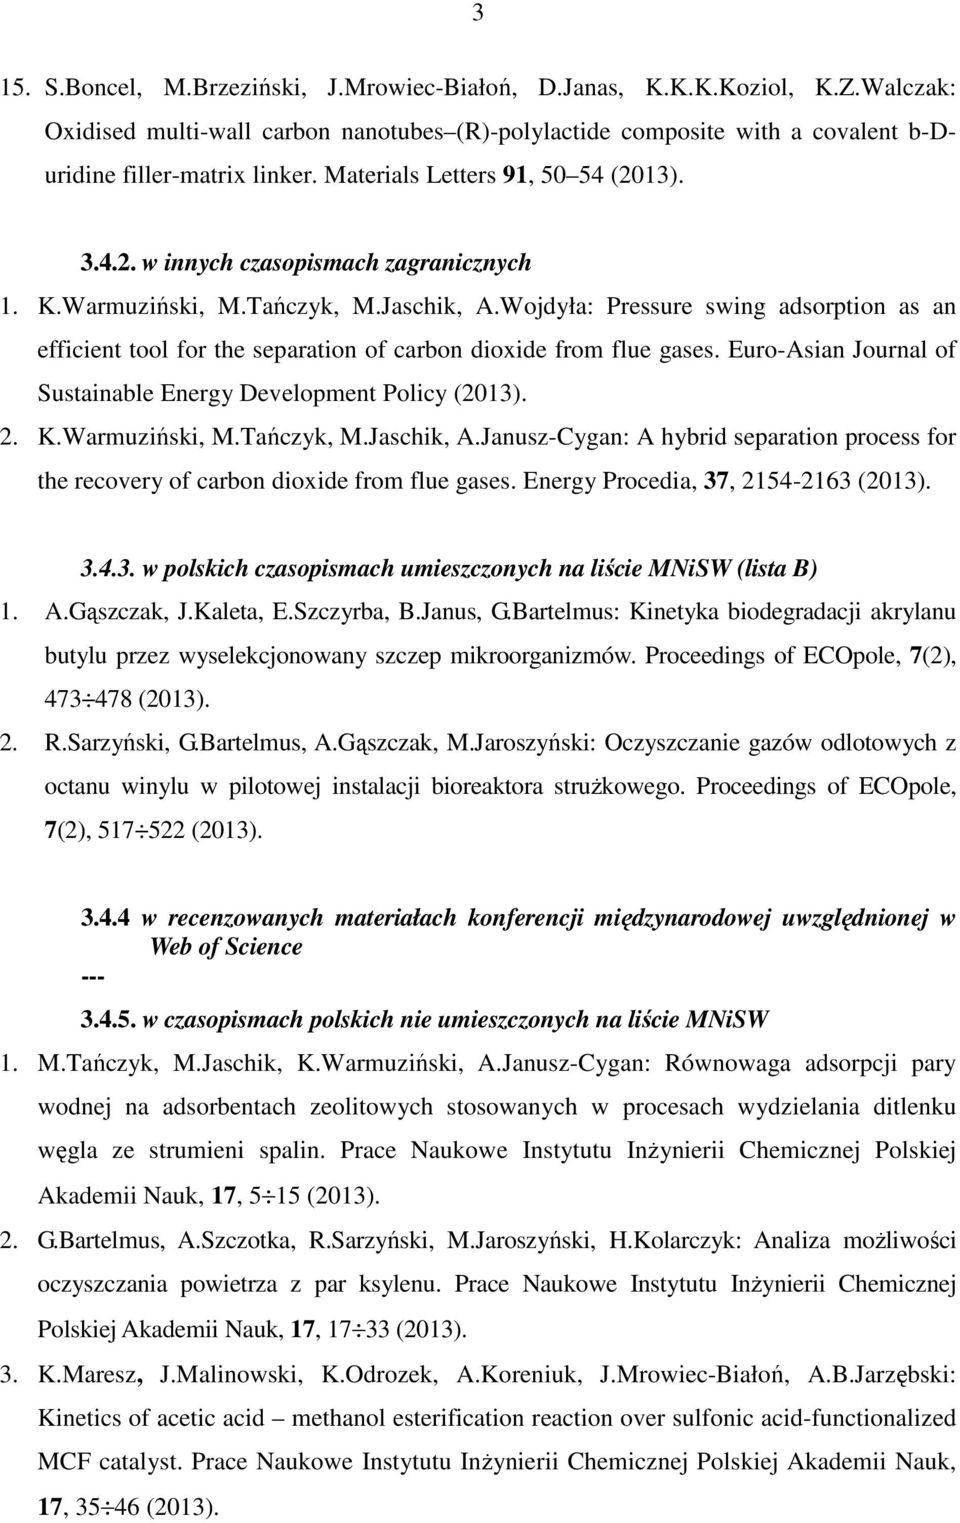 Wojdyła: Pressure swing adsorption as an efficient tool for the separation of carbon dioxide from flue gases. Euro-Asian Journal of Sustainable Energy Development Policy (2013). 2. K.Warmuziński, M.